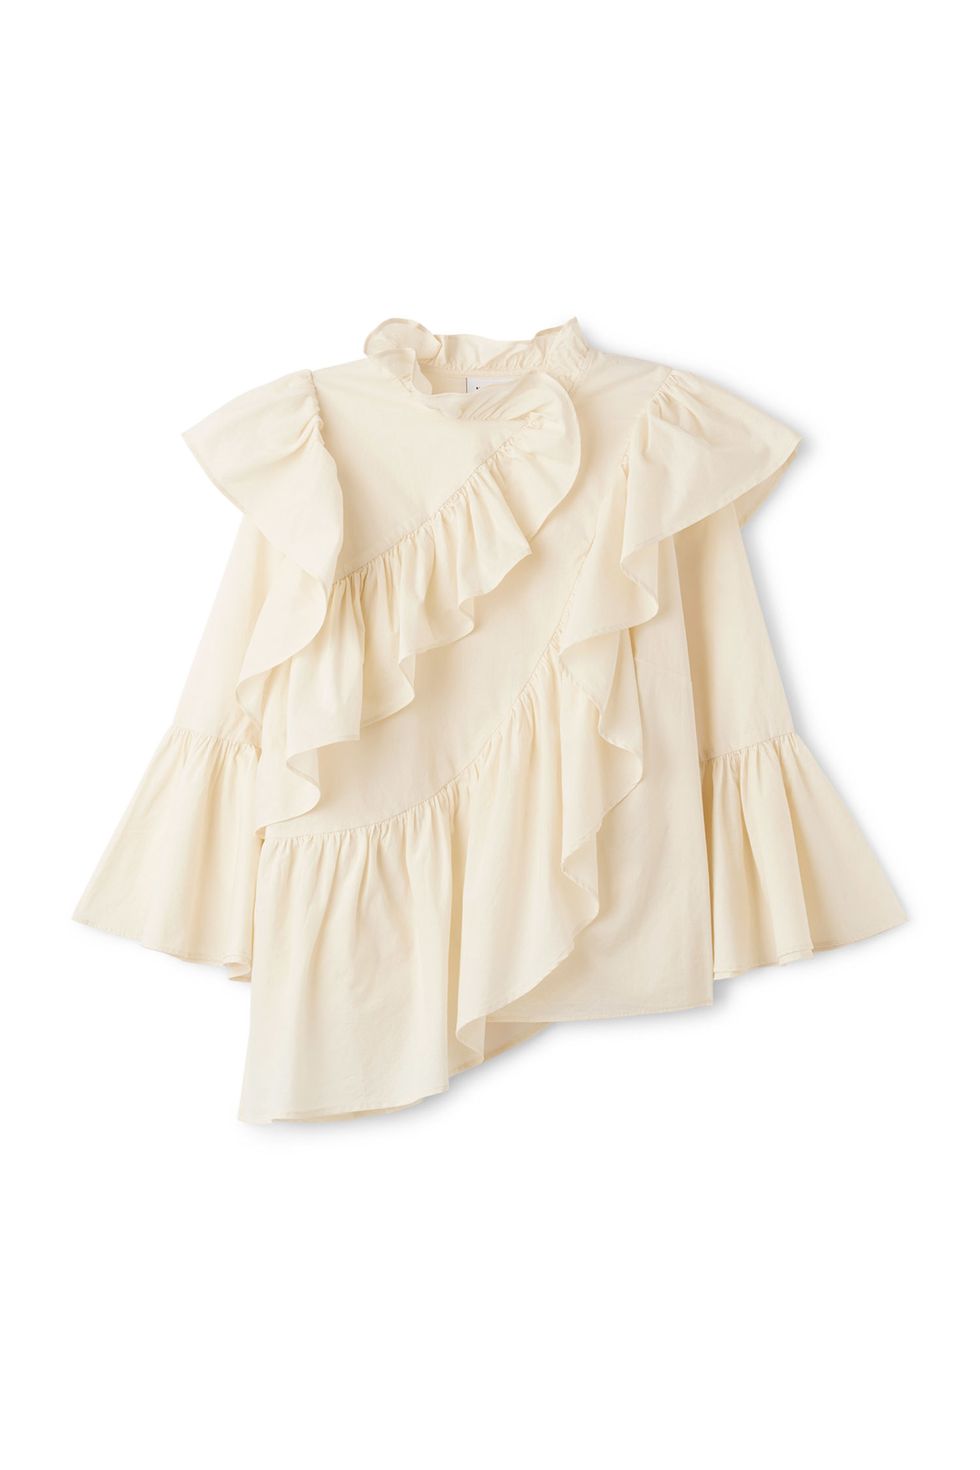 Clothing, Beige, Outerwear, Ruffle, Blouse, Sleeve, Textile, Dress, Fashion accessory, Collar, 